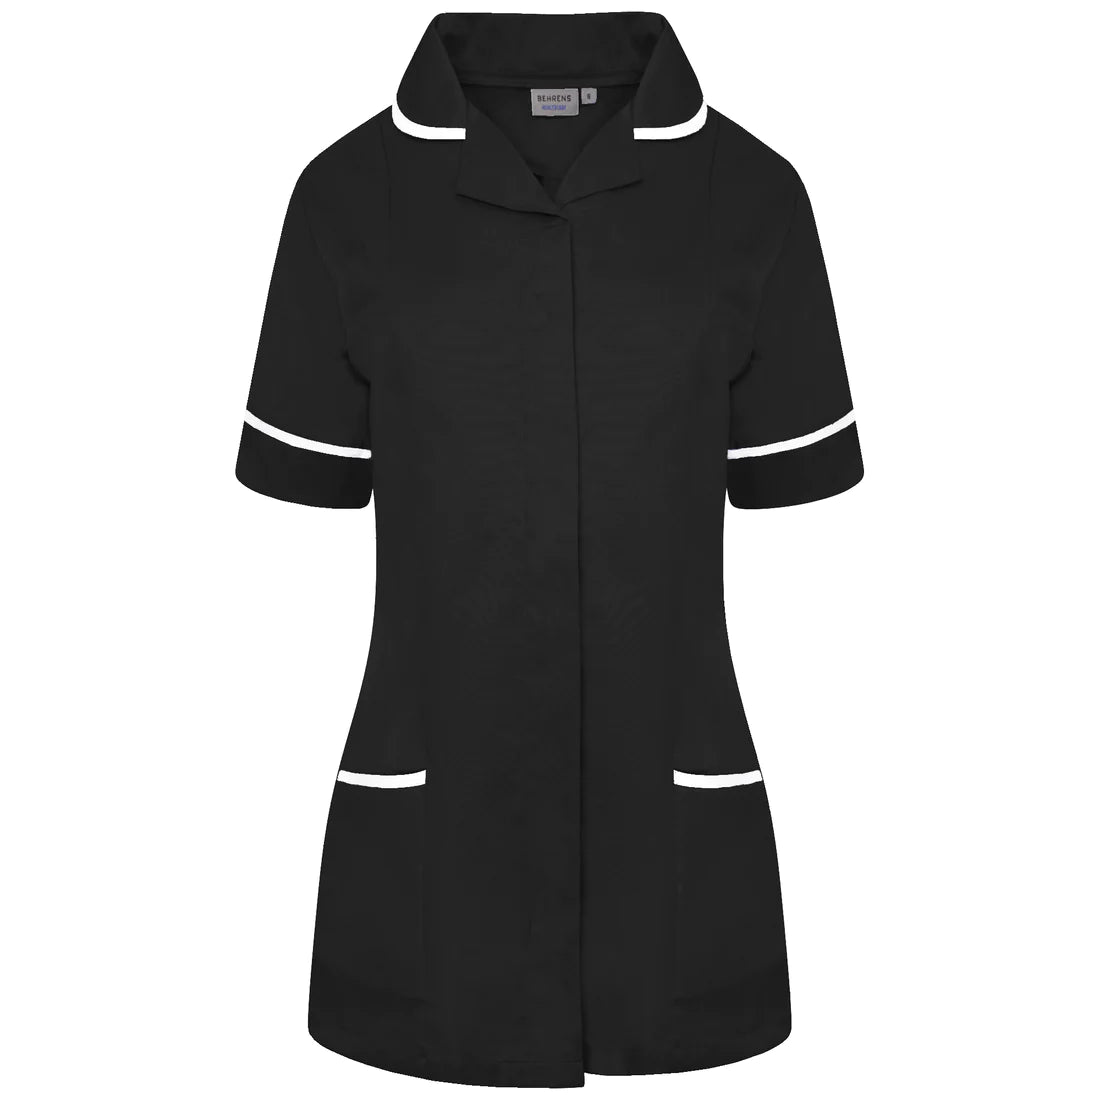 Black/White Contrast Ladies Tunic with Round Collar - NCLTPS